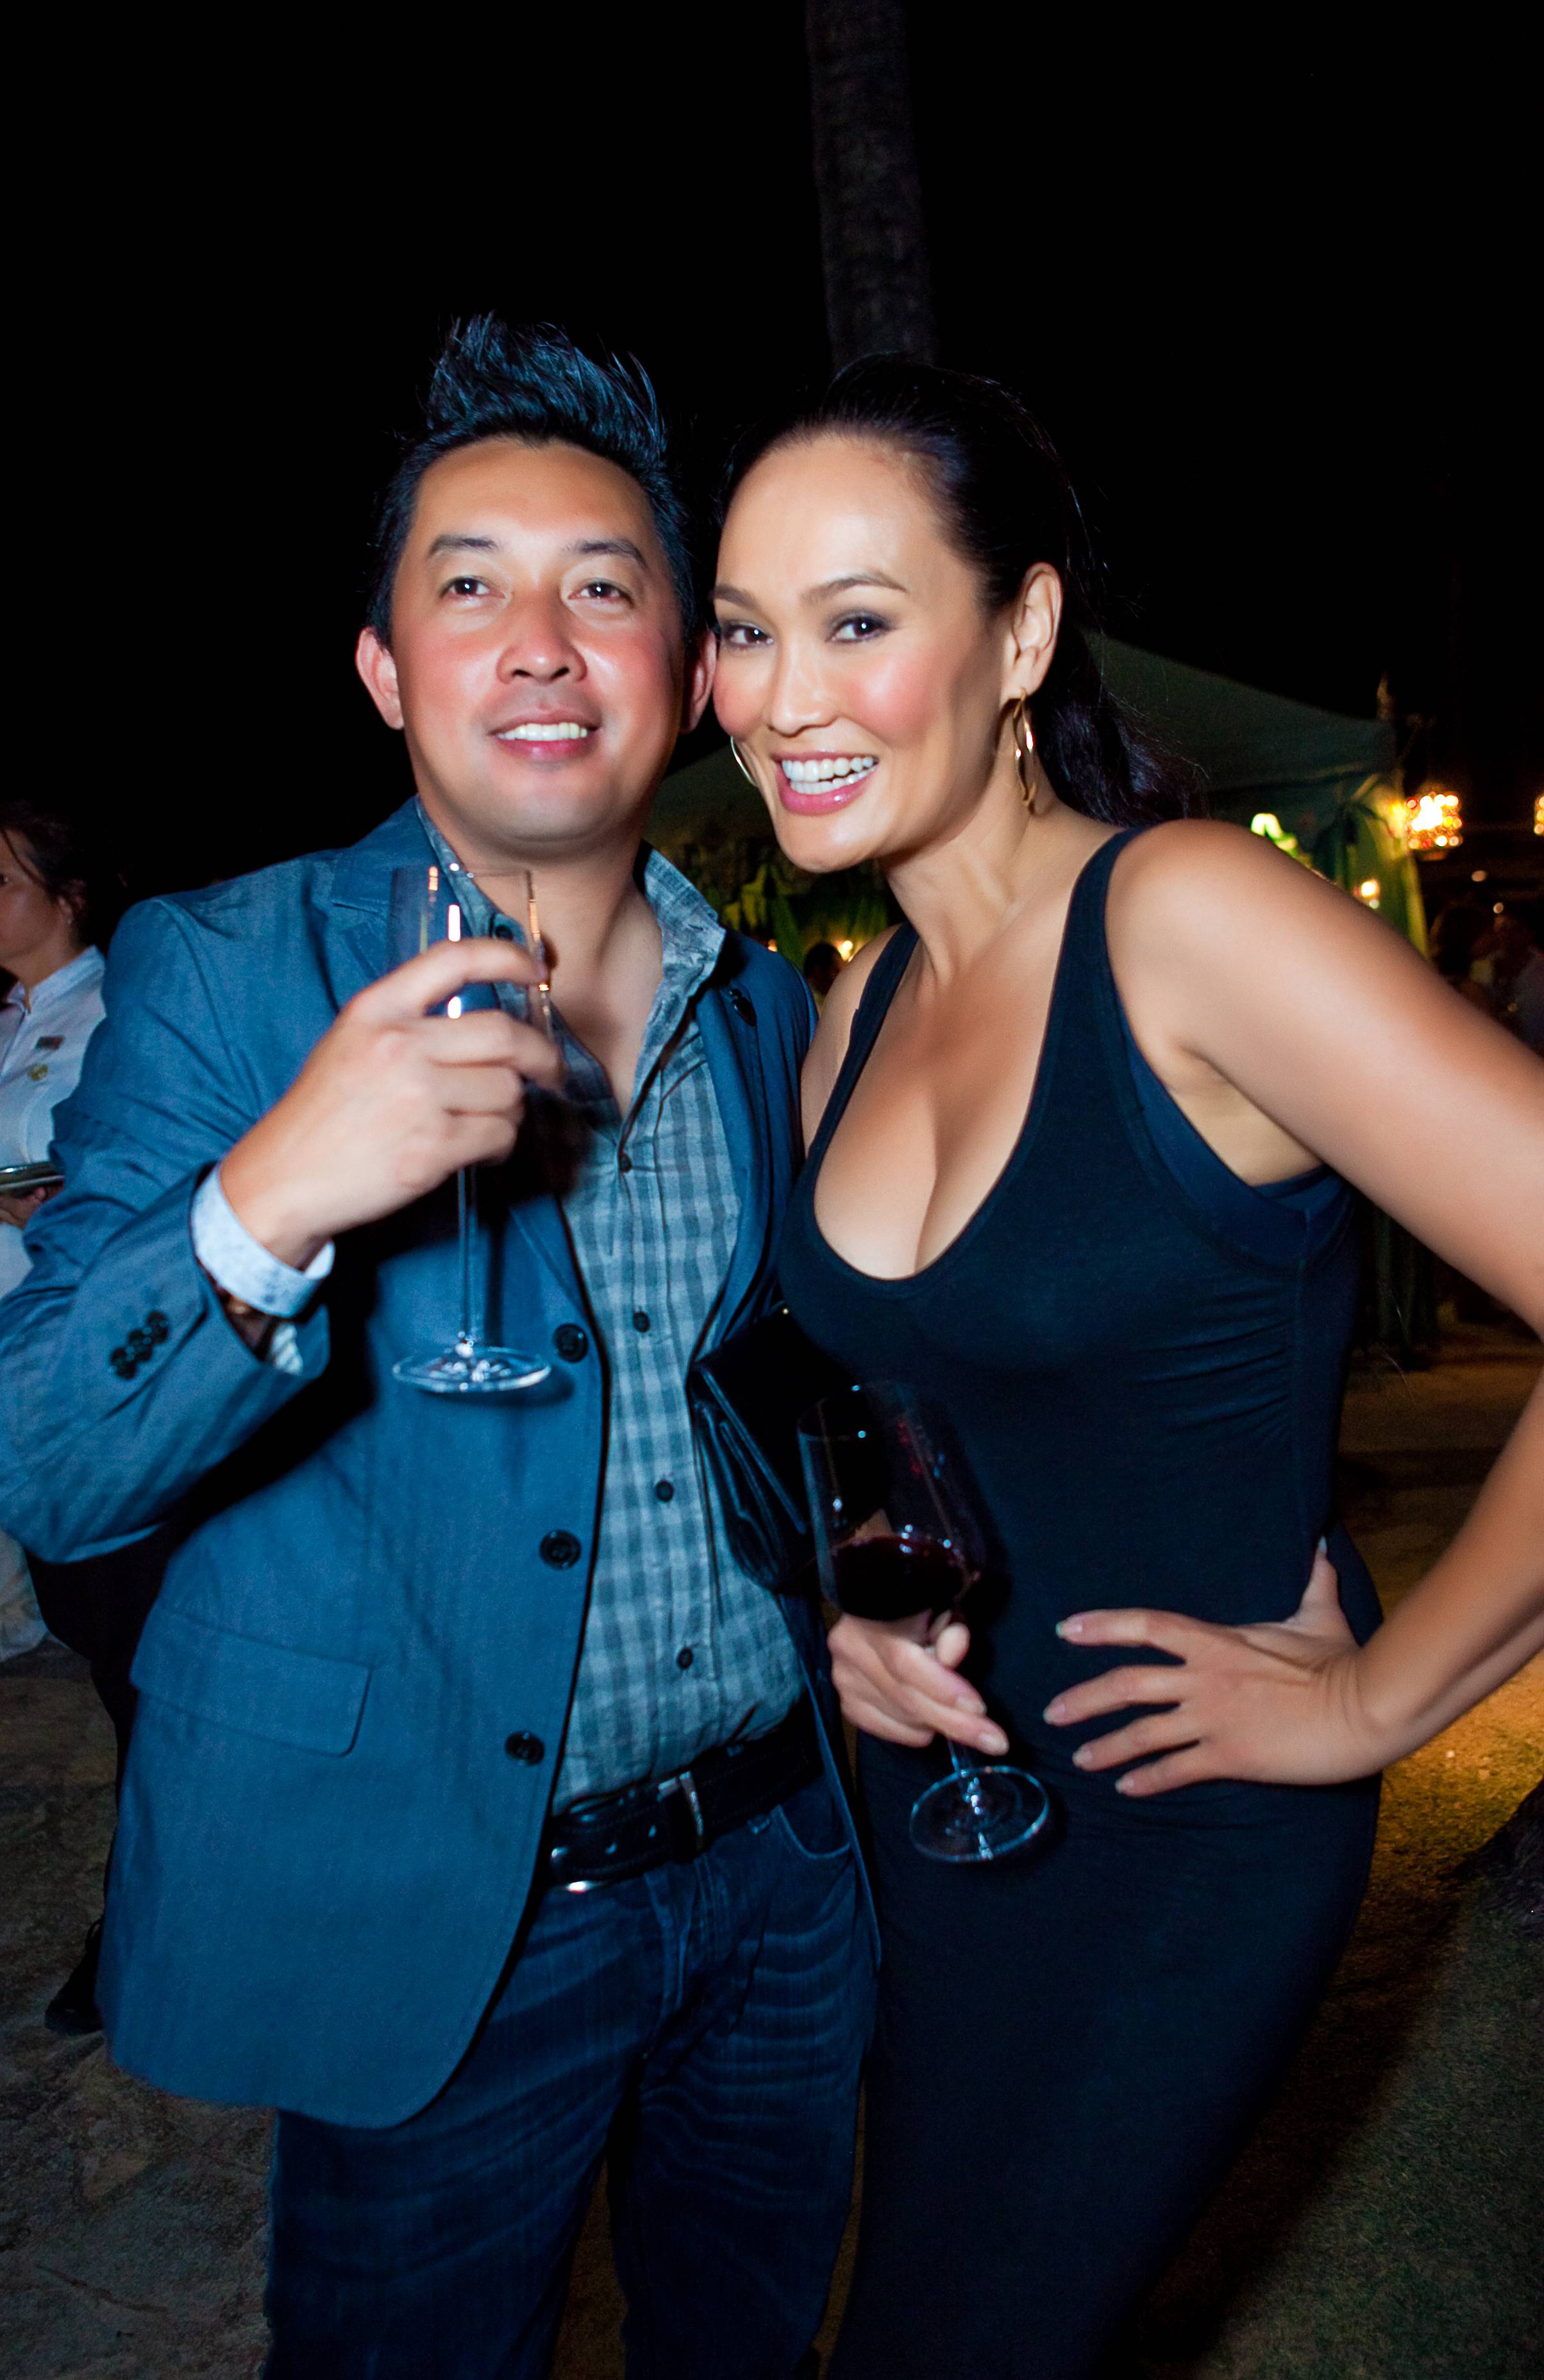 Tia Carrere - Images Gallery